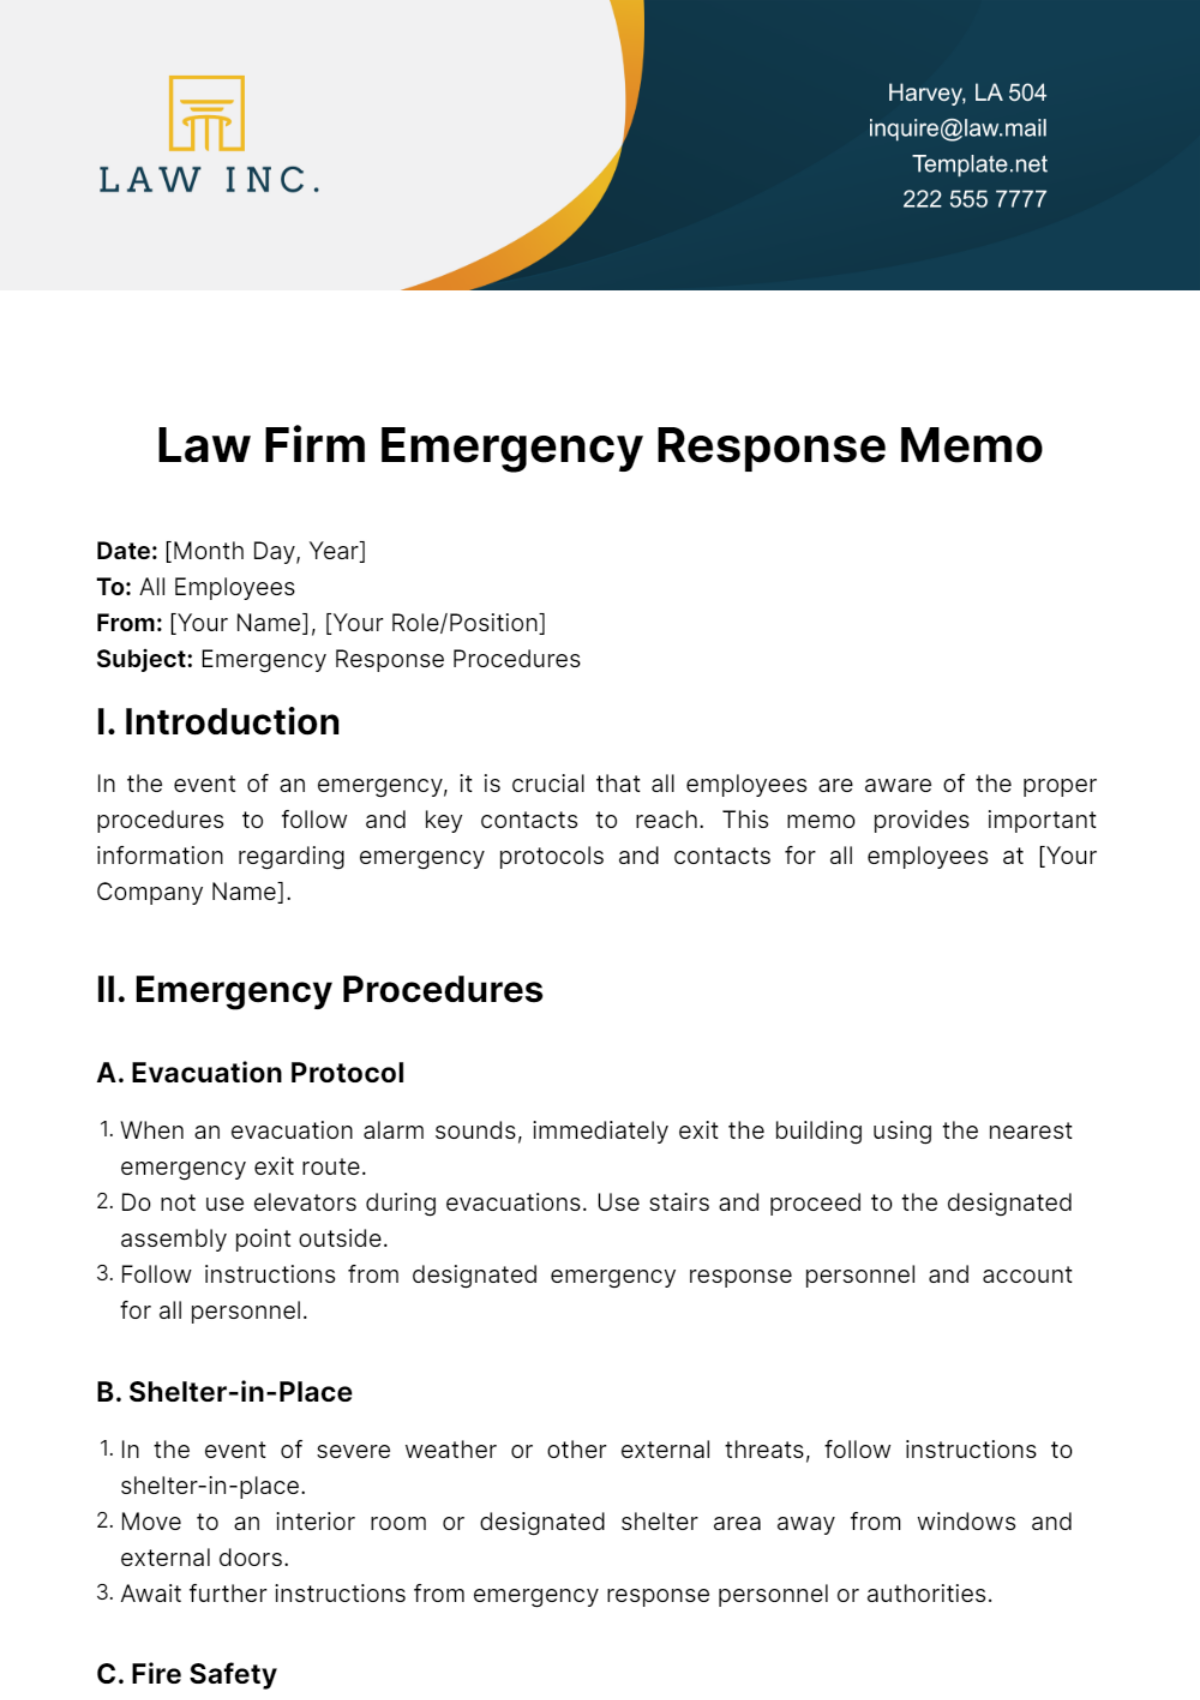 Free Law Firm Emergency Response Memo Template